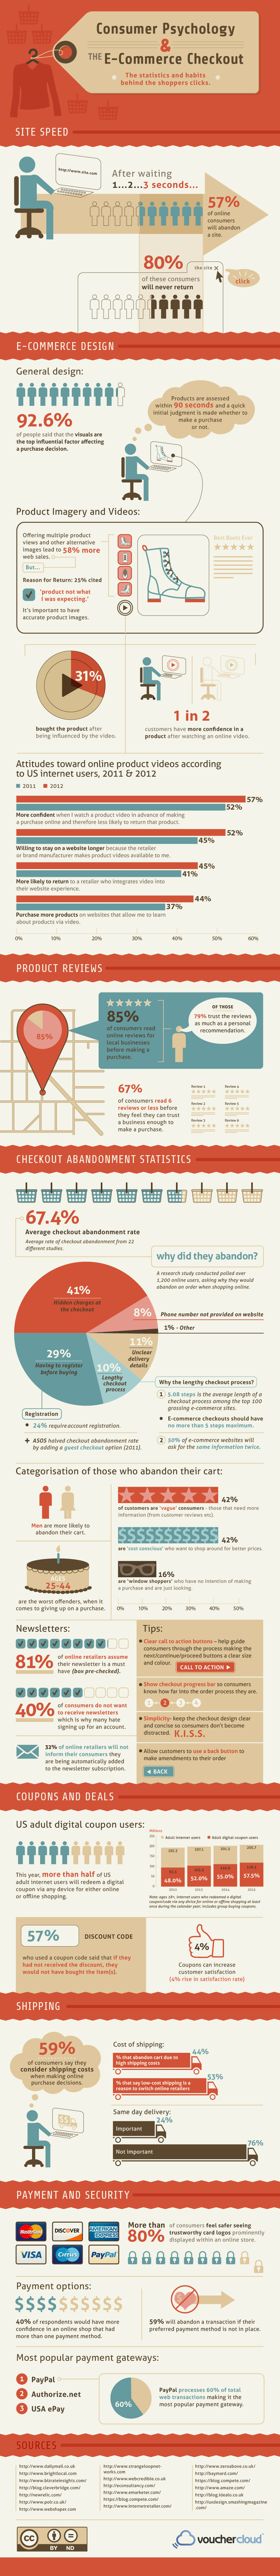 Consumer Psychology and the E-Commerce Checkout